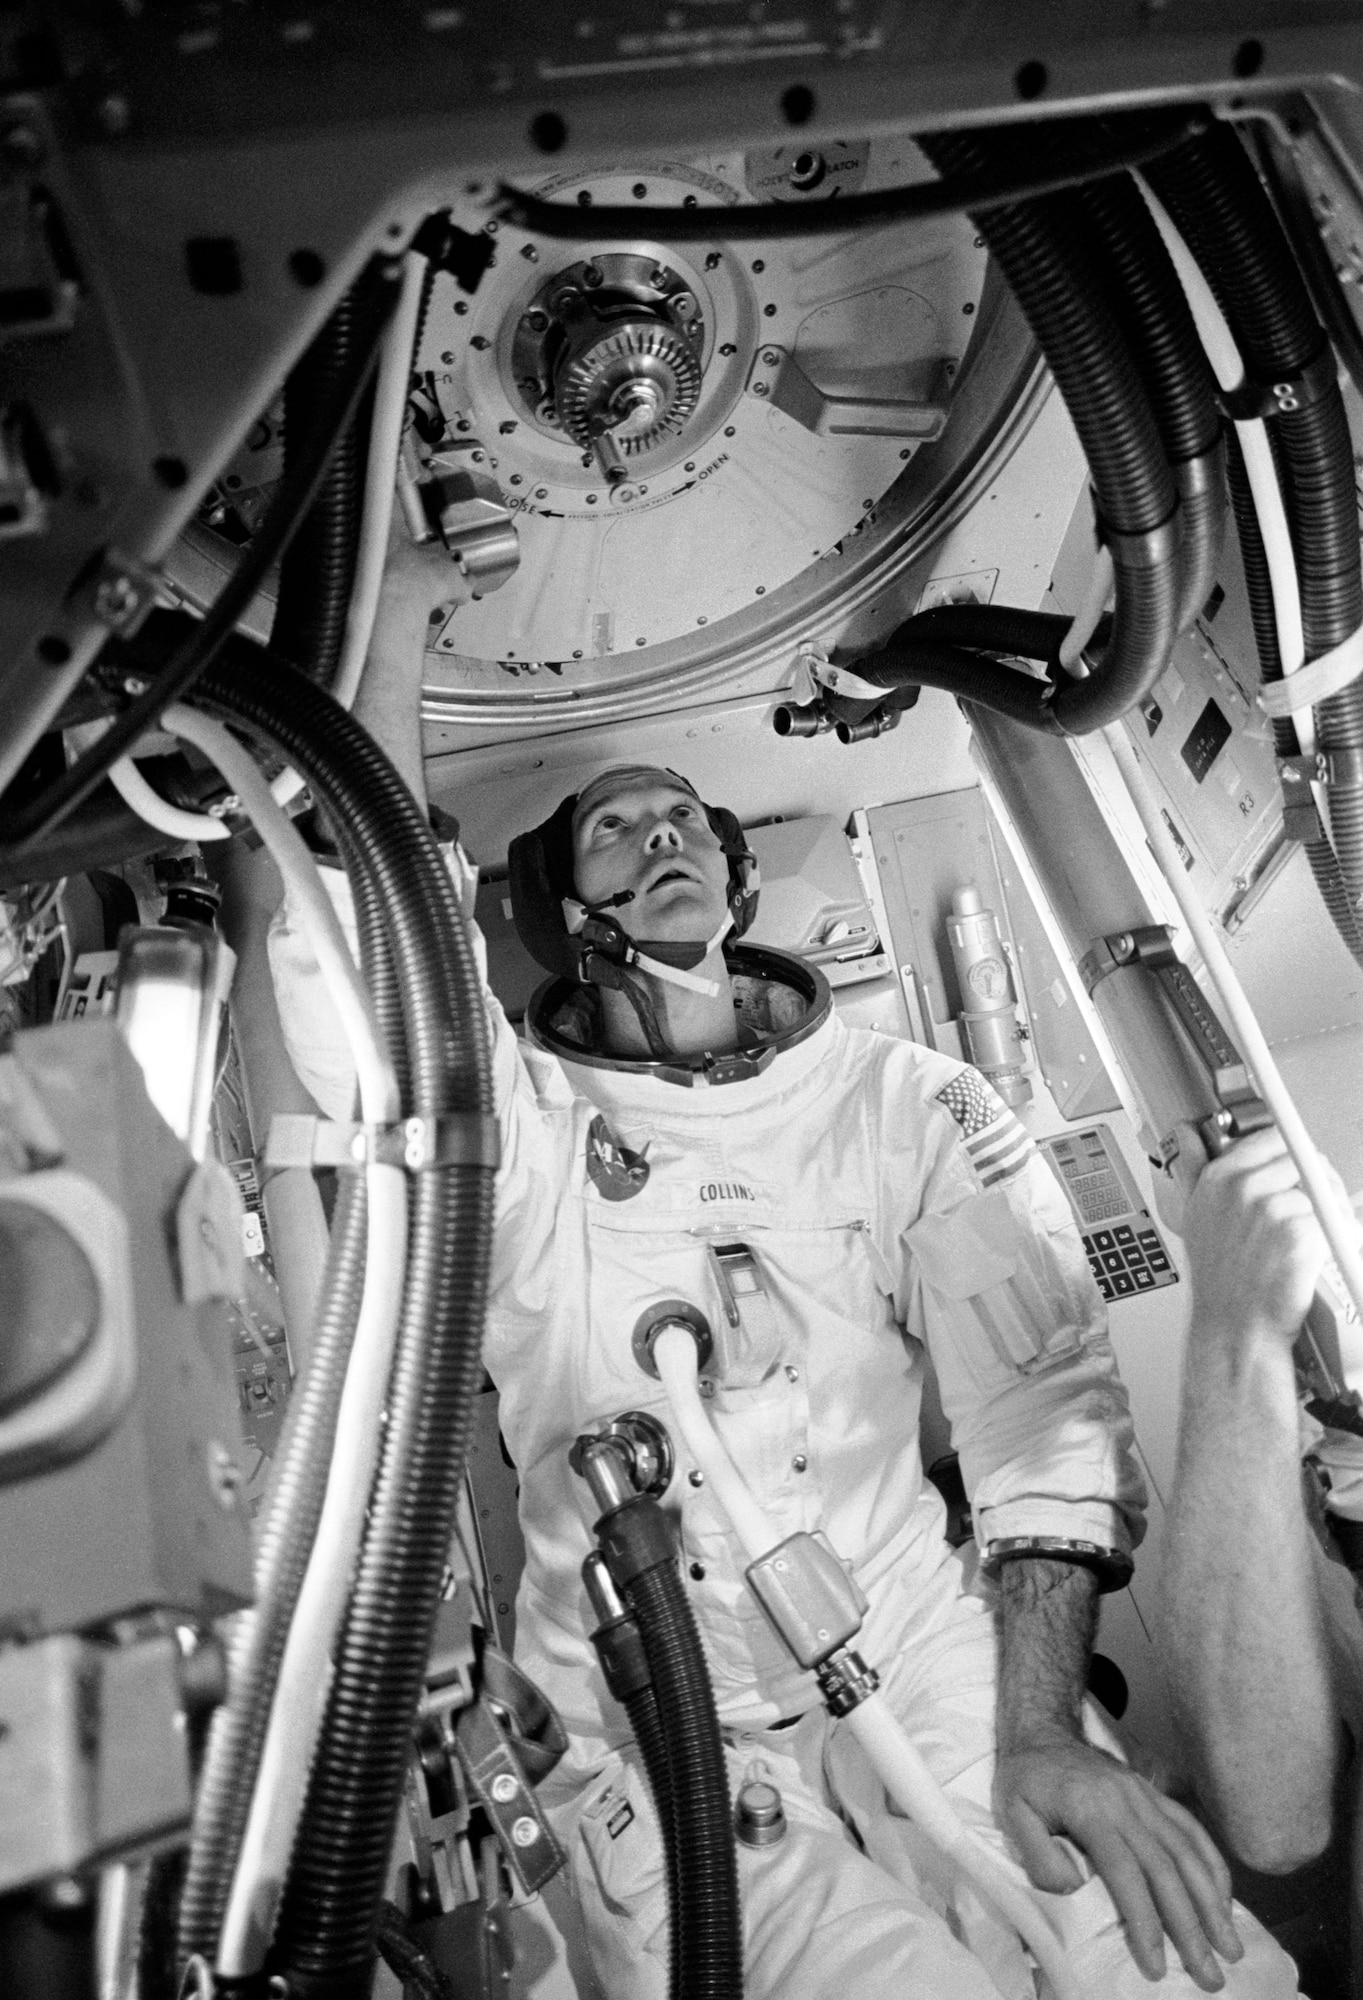 Apollo 11 Command Module Pilot and USAF Col. (later Maj. Gen.) Michael Collins trains in his A7L suit. The circular hatch above his head is at the top of the cone-shaped Apollo spacecraft.(Contributed photo)